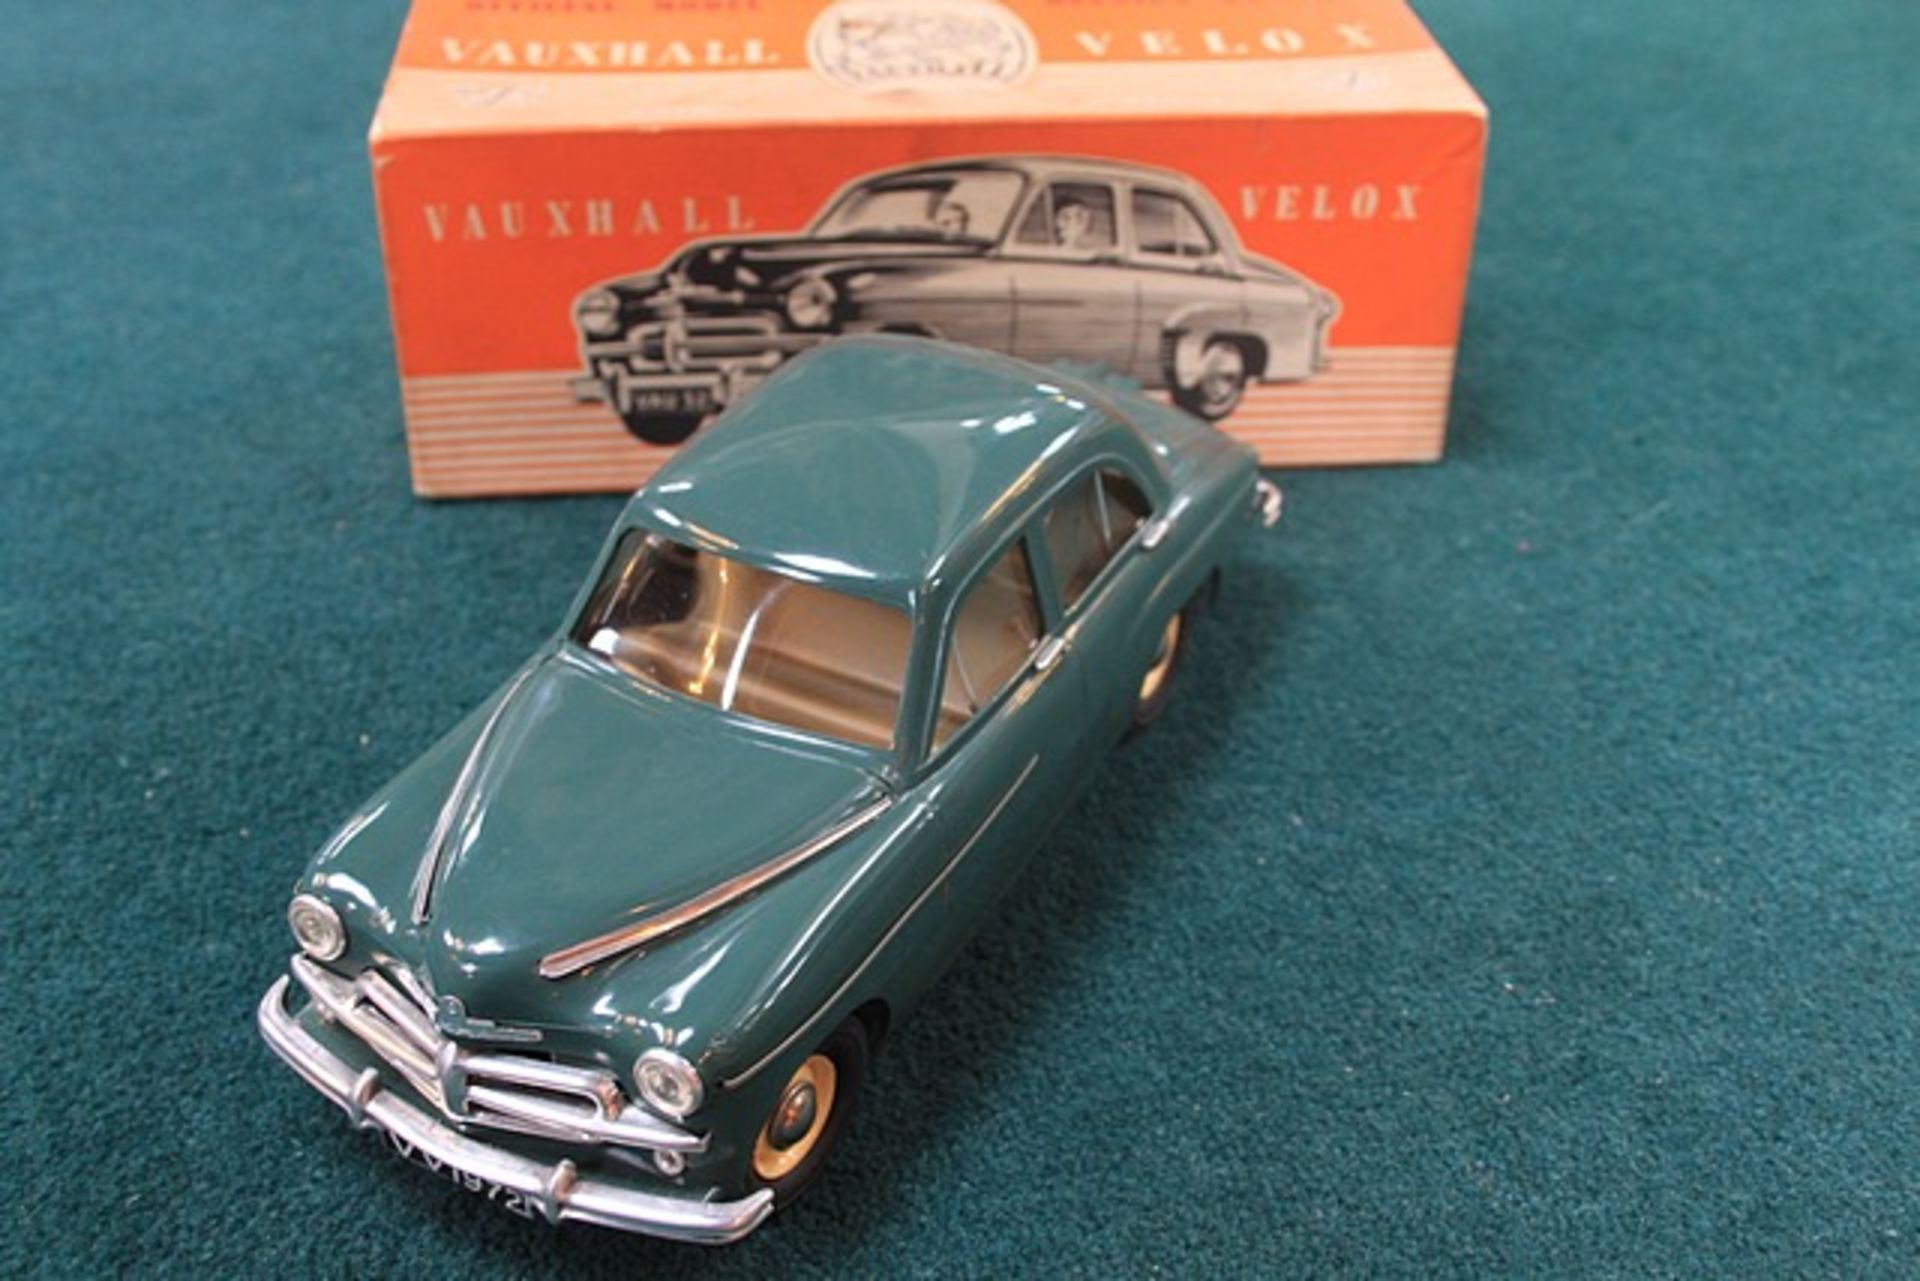 Victory Industries Vauxhall Velox Official Model Replica Of The Vauxhall Velox Battery Operated - Image 2 of 2